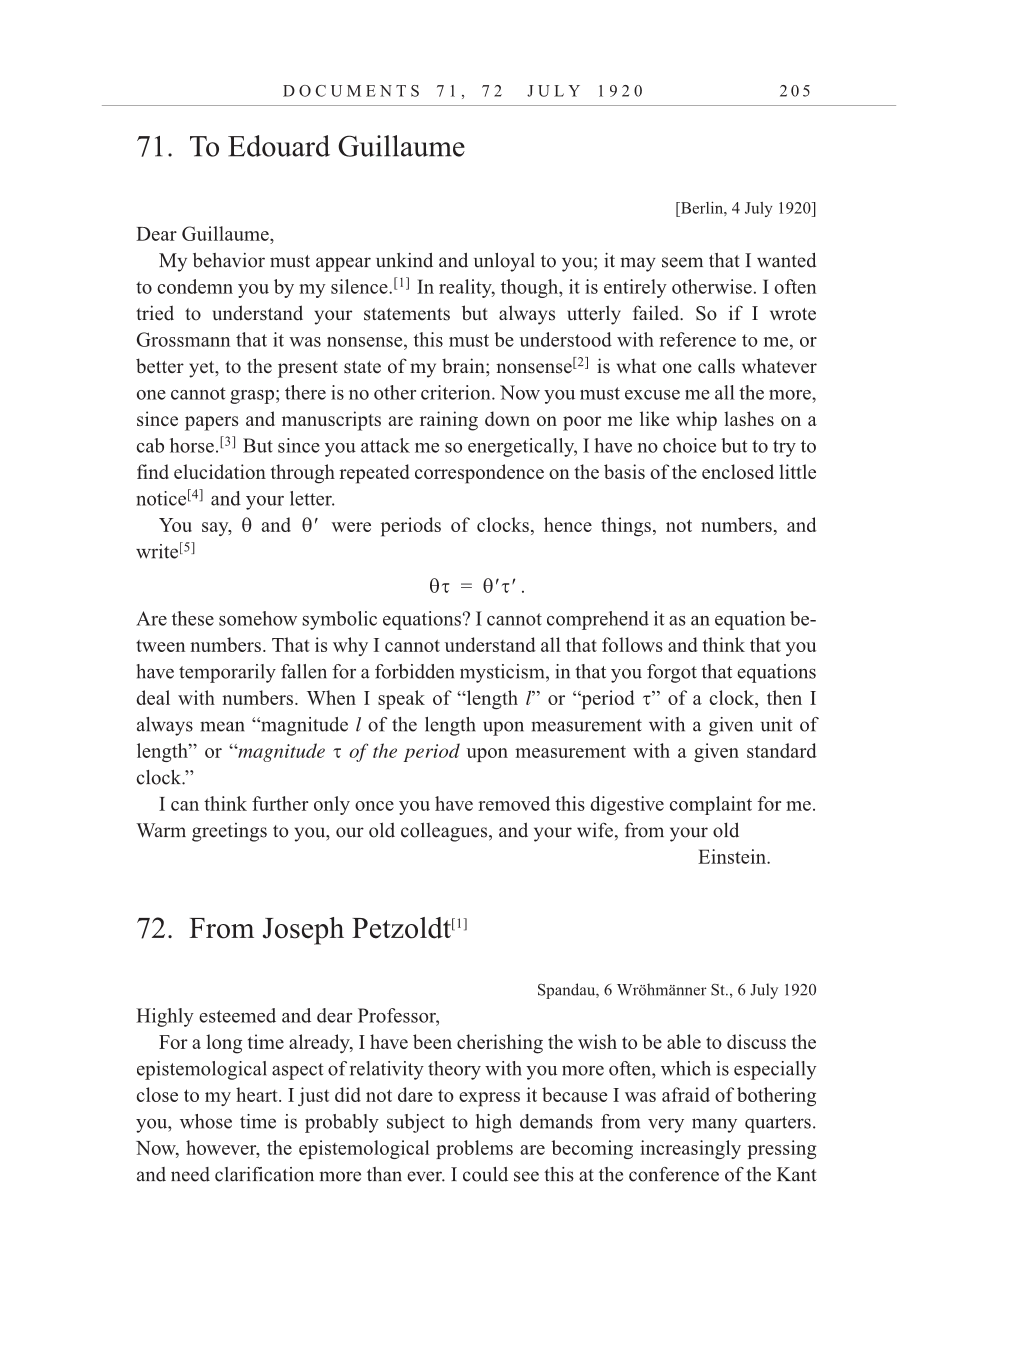 Volume 10: The Berlin Years: Correspondence, May-December 1920, and Supplementary Correspondence, 1909-1920 (English translation supplement) page 205